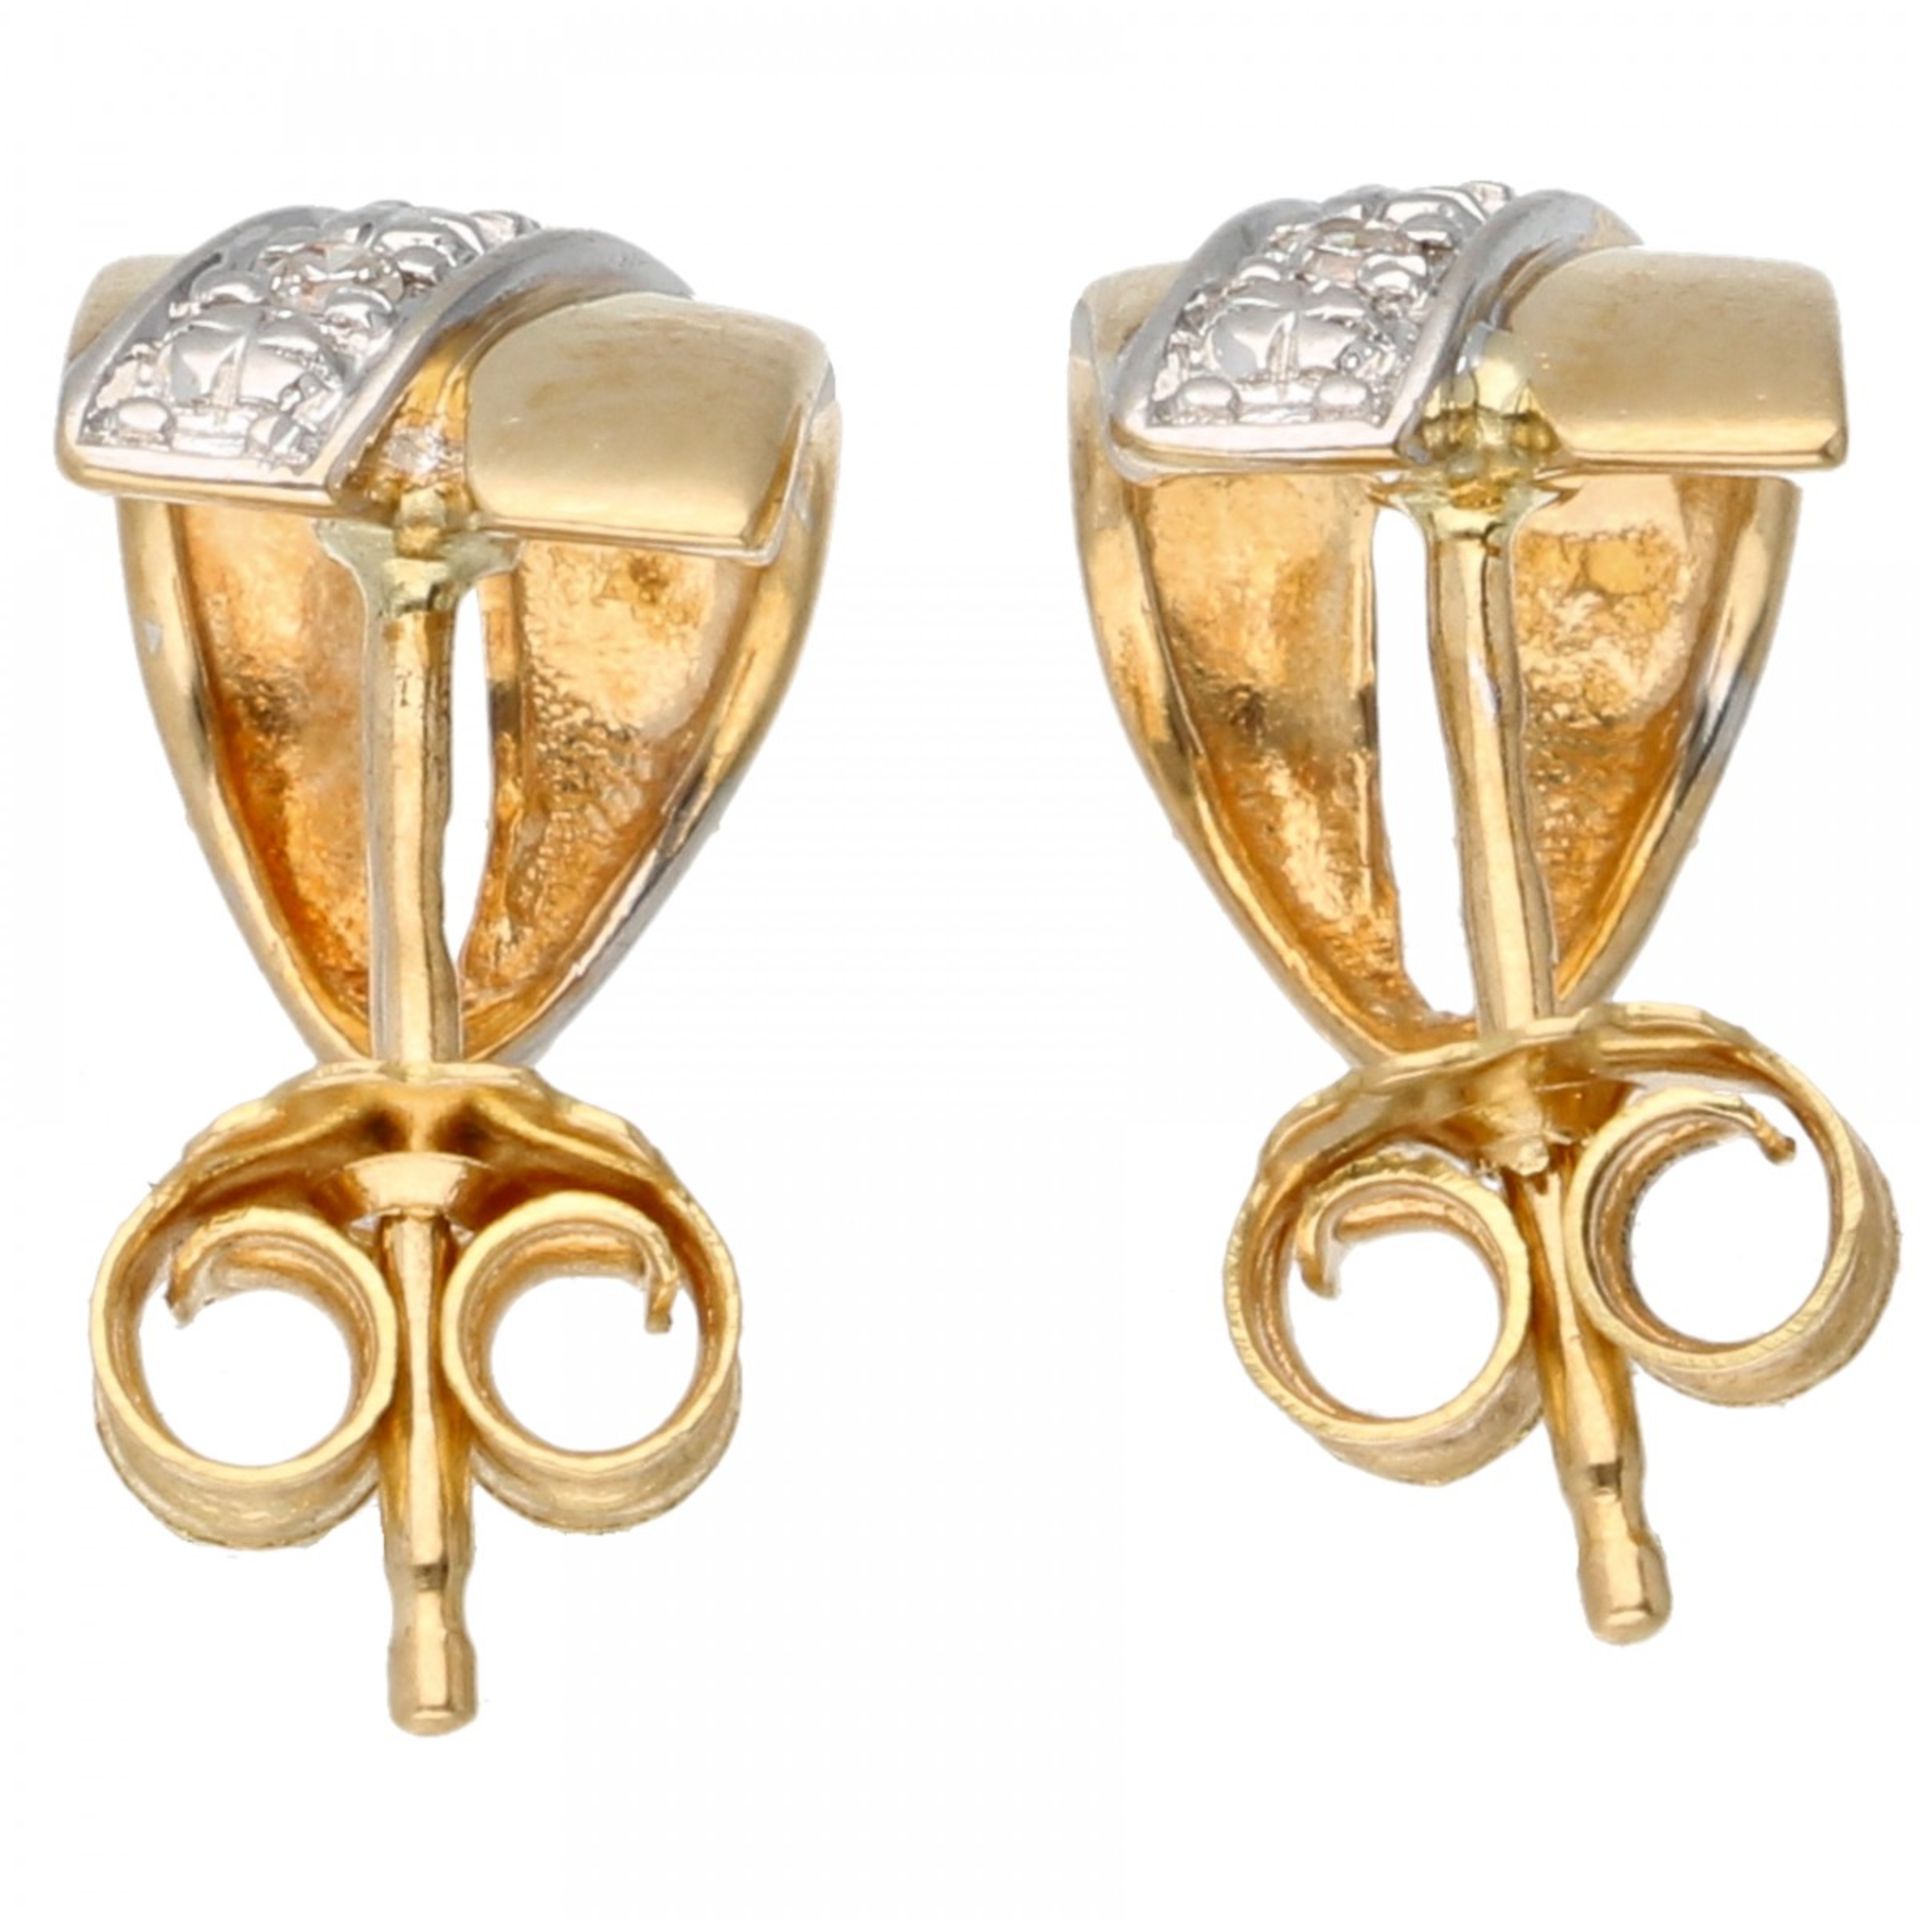 Bicolor gold earrings set with diamond - 18 ct. - Image 2 of 2